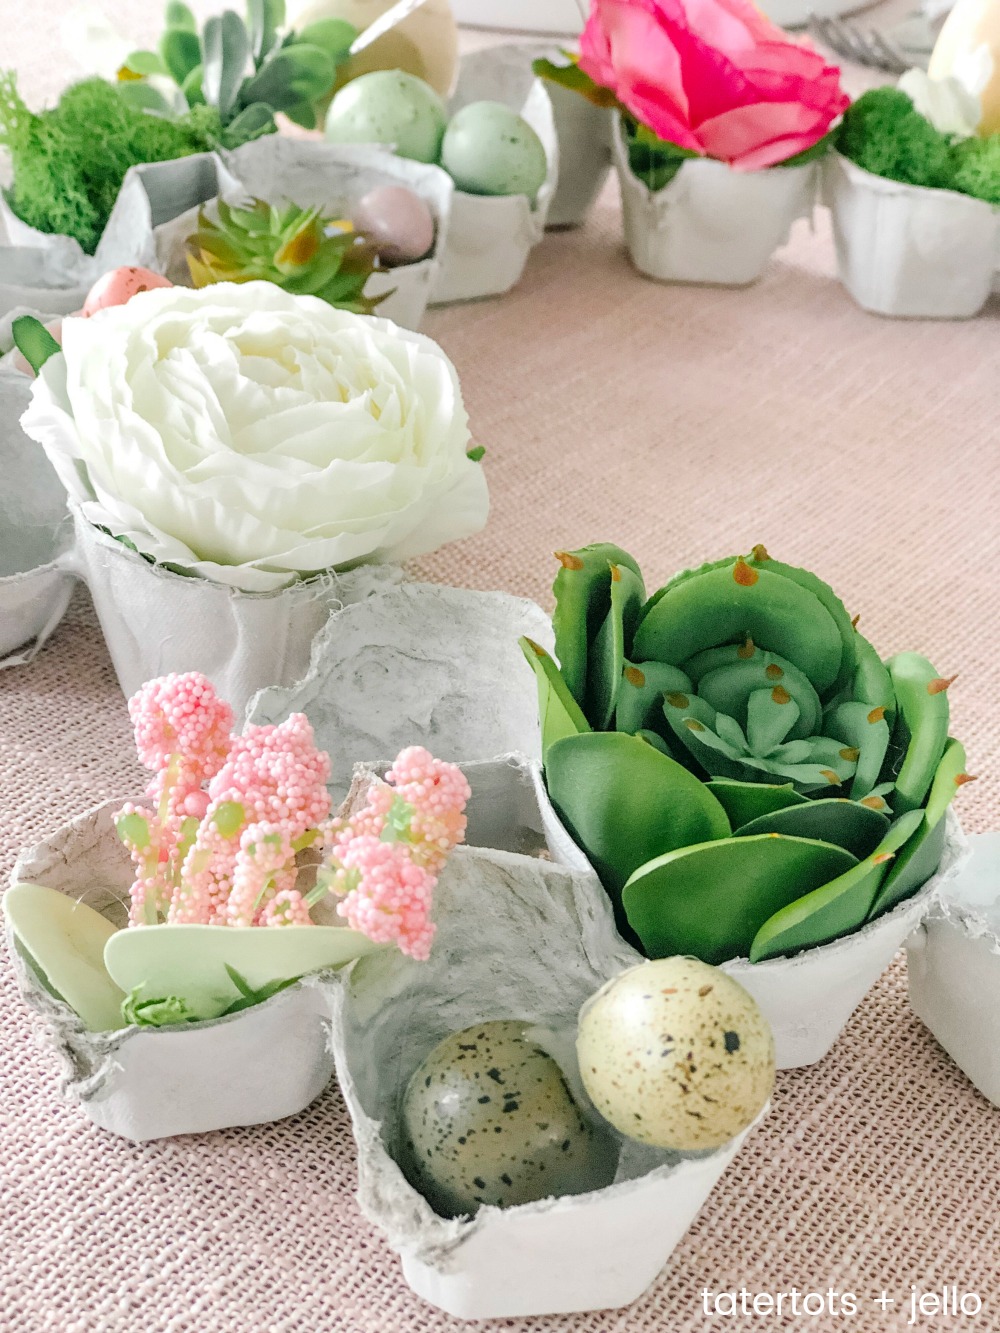 Egg Carton Spring Succulent and Flower Wreath Centerpiece. Don't throw your old egg cartons out, upcycle them into a beautiful Spring wreath centerpiece!